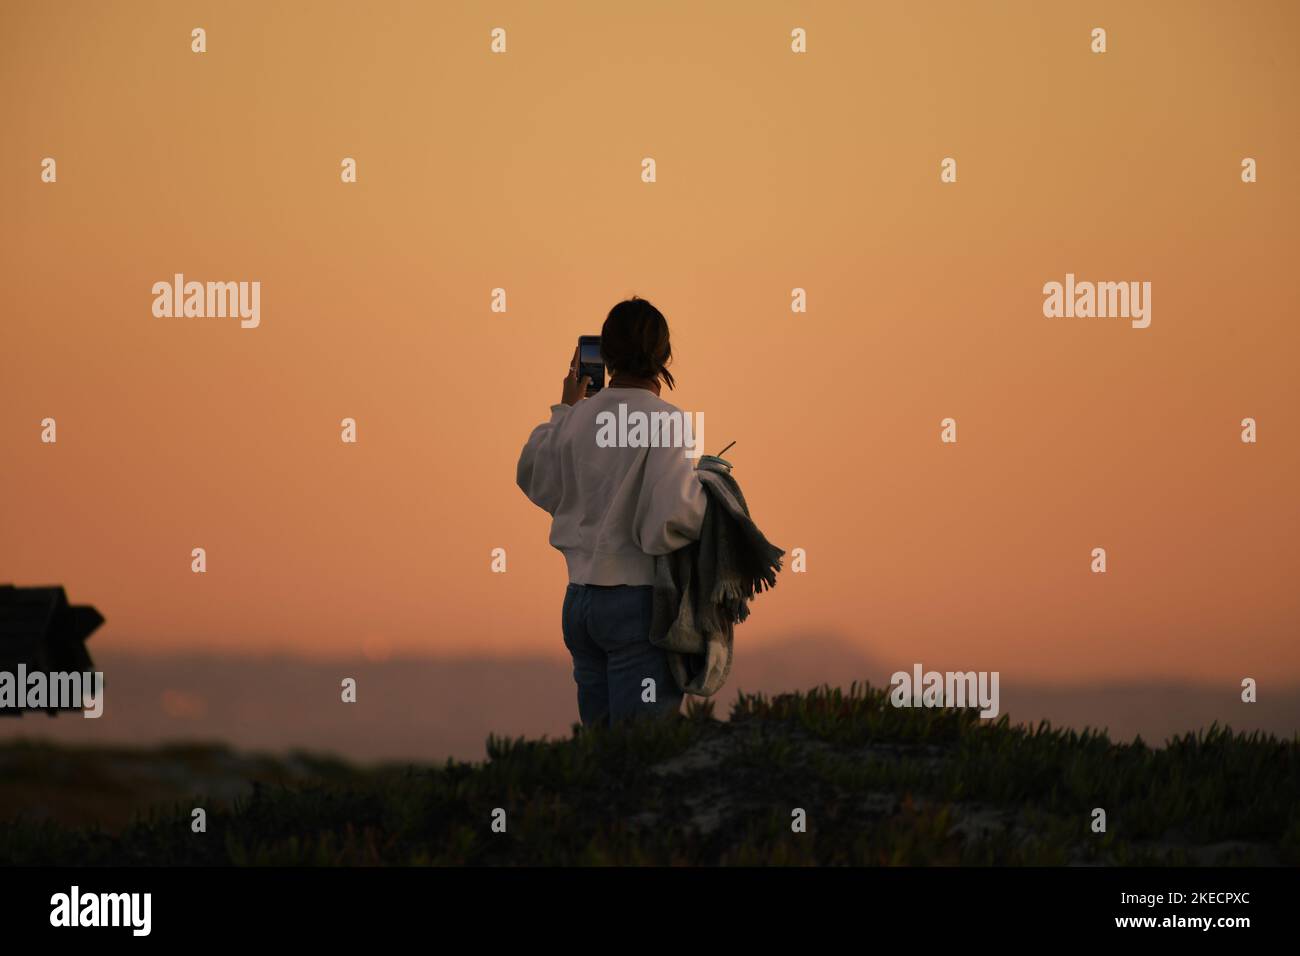 Girl standing on a sand dune, taking a photo of the beach at sunset in Coronado, California Stock Photo